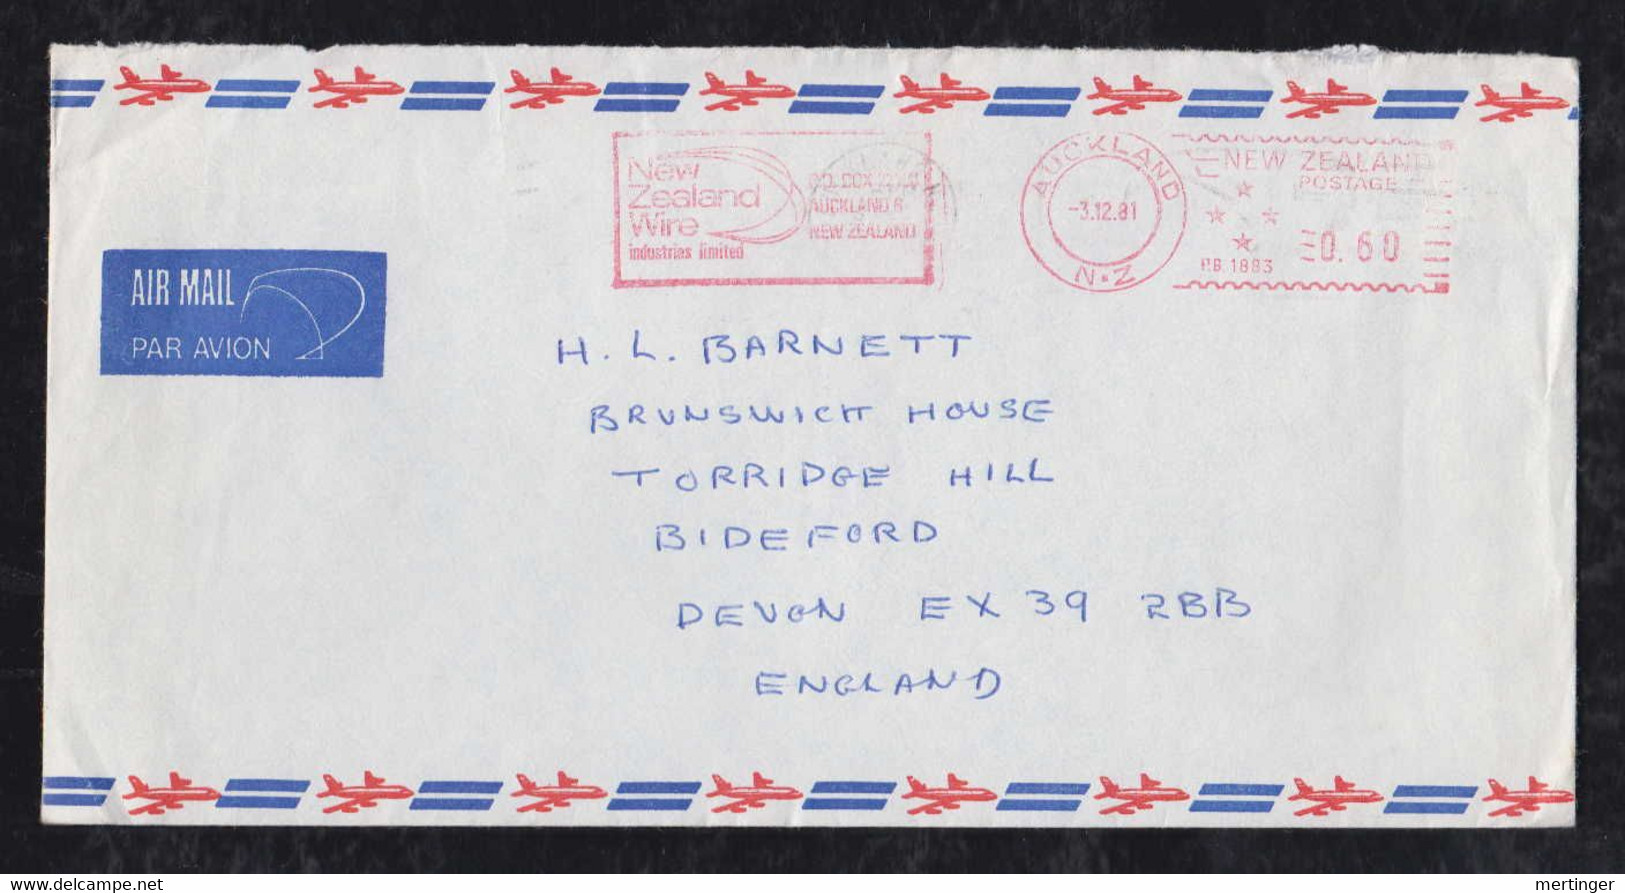 New Zealand 1981 Meter Airmail Cover $0,60 Auckland To Bideford England New Zealand Wire Advertising - Covers & Documents